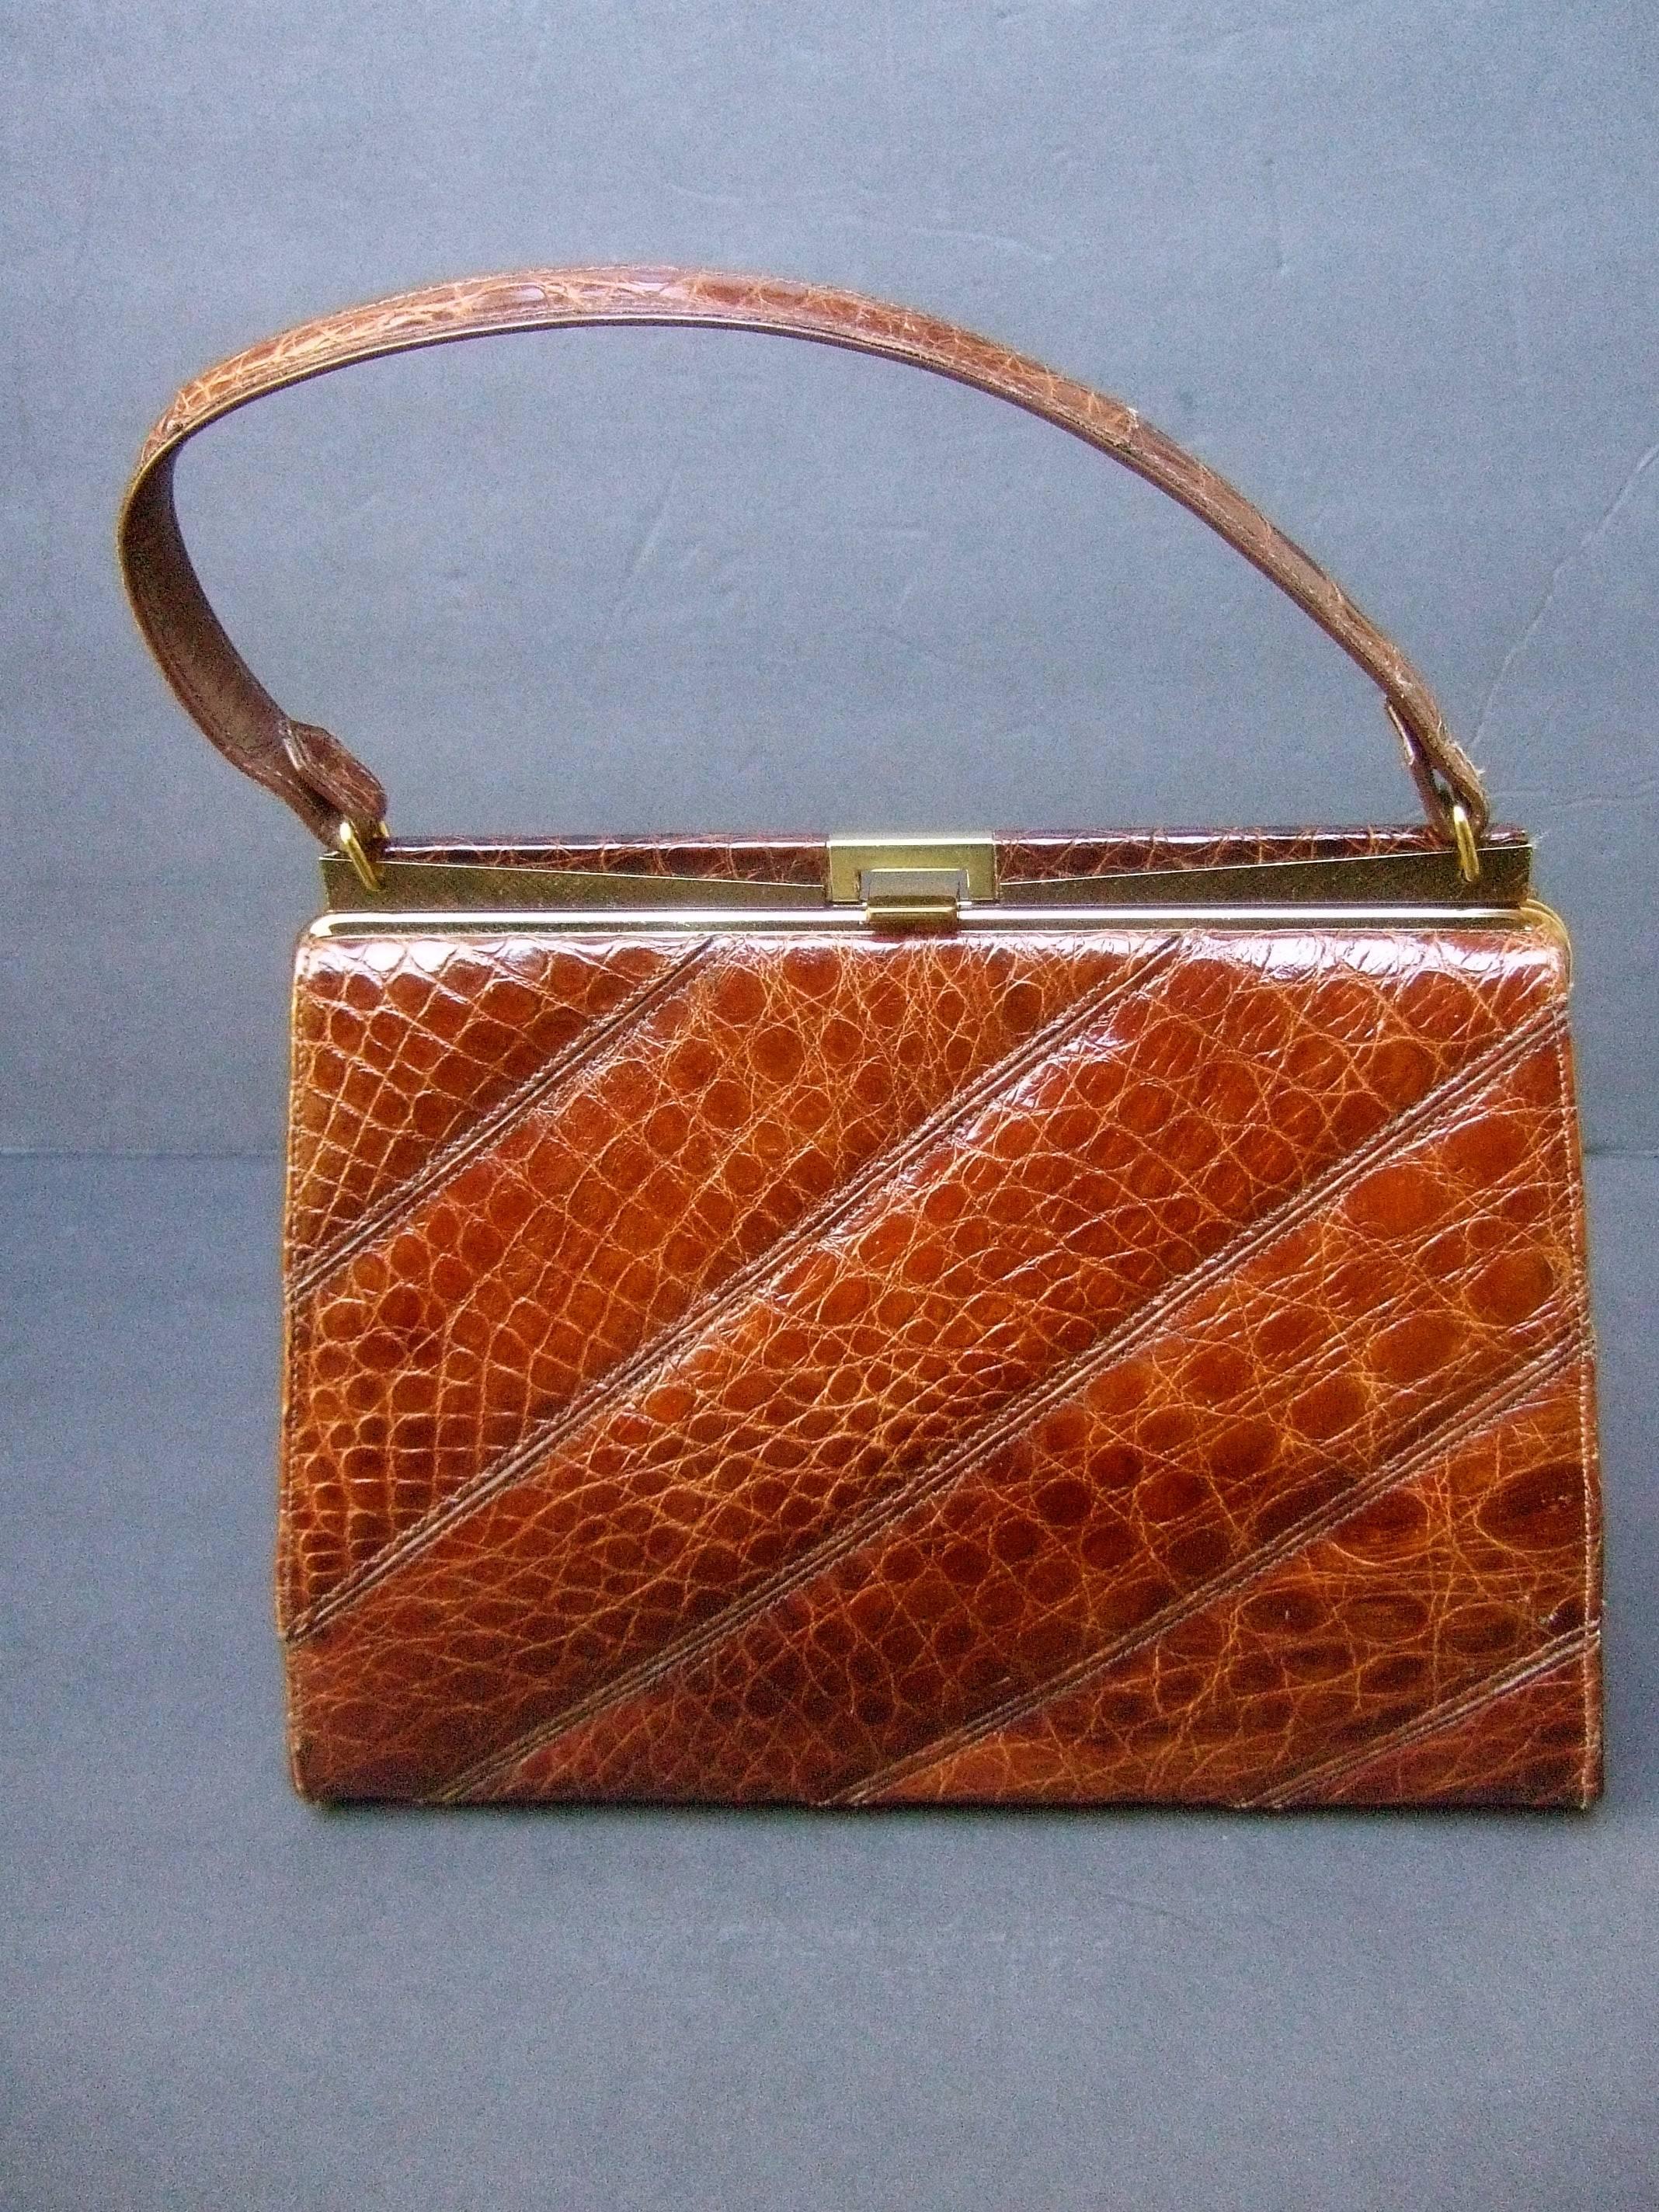 Chic genuine brown alligator handbag ca 1960s
The stylish retro handbag is covered with exotic
alligator skin that extends to the handle & clasp 

Accented with sleek gilt metal hardware
The interior is lined in ivory color vinyl 
designed with a